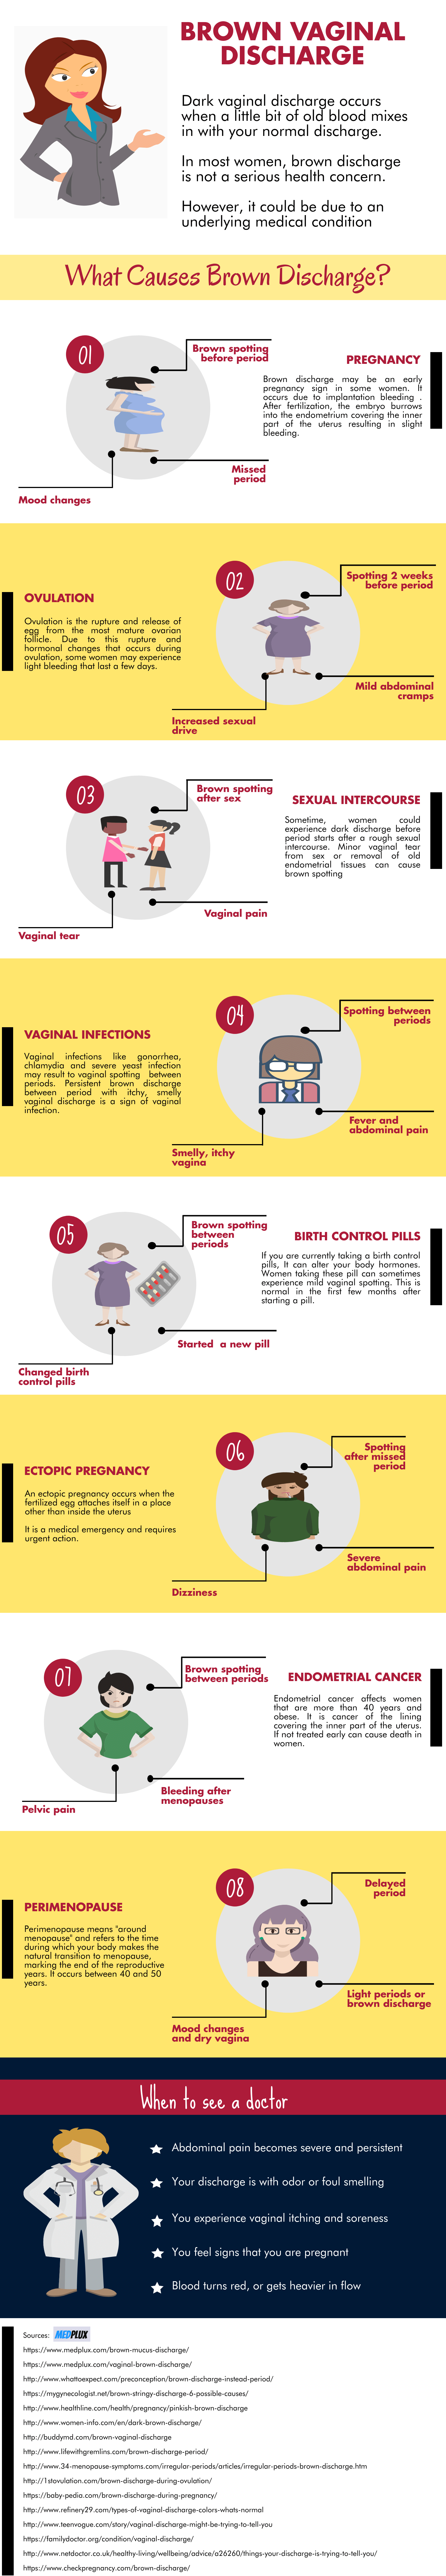 Vaginal Brown Discharge: Causes and Concerns - Infographic